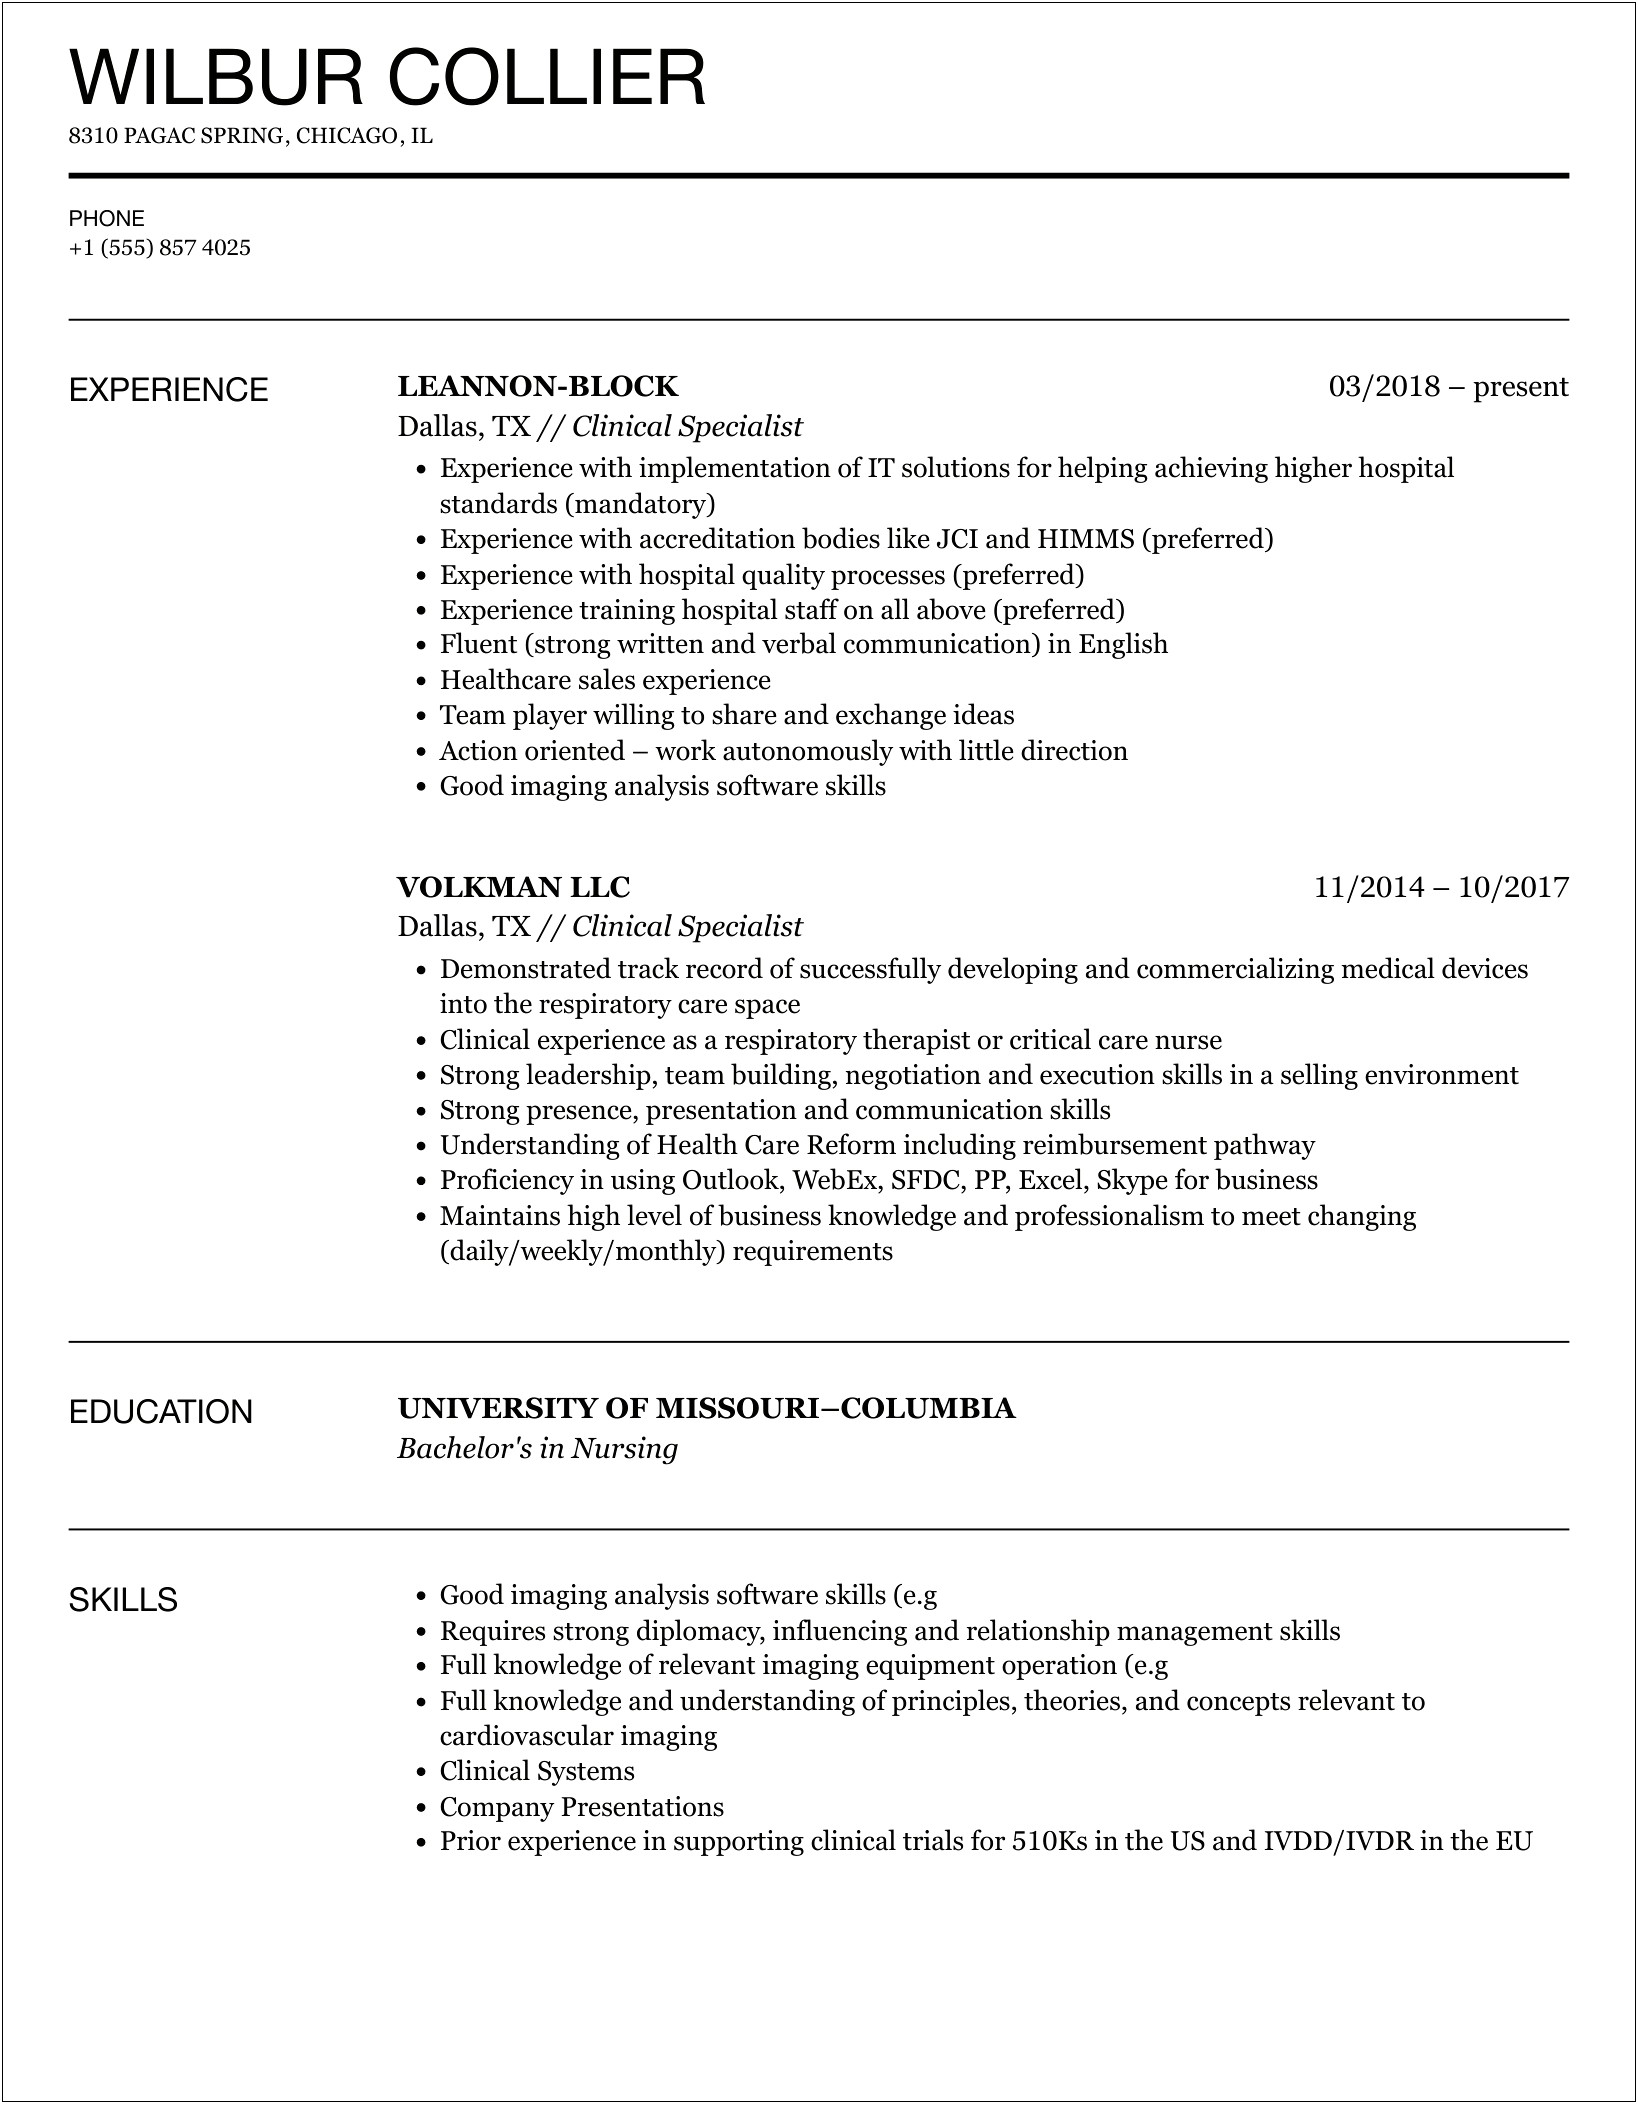 Medical Device Clinical Specialist Resume Example